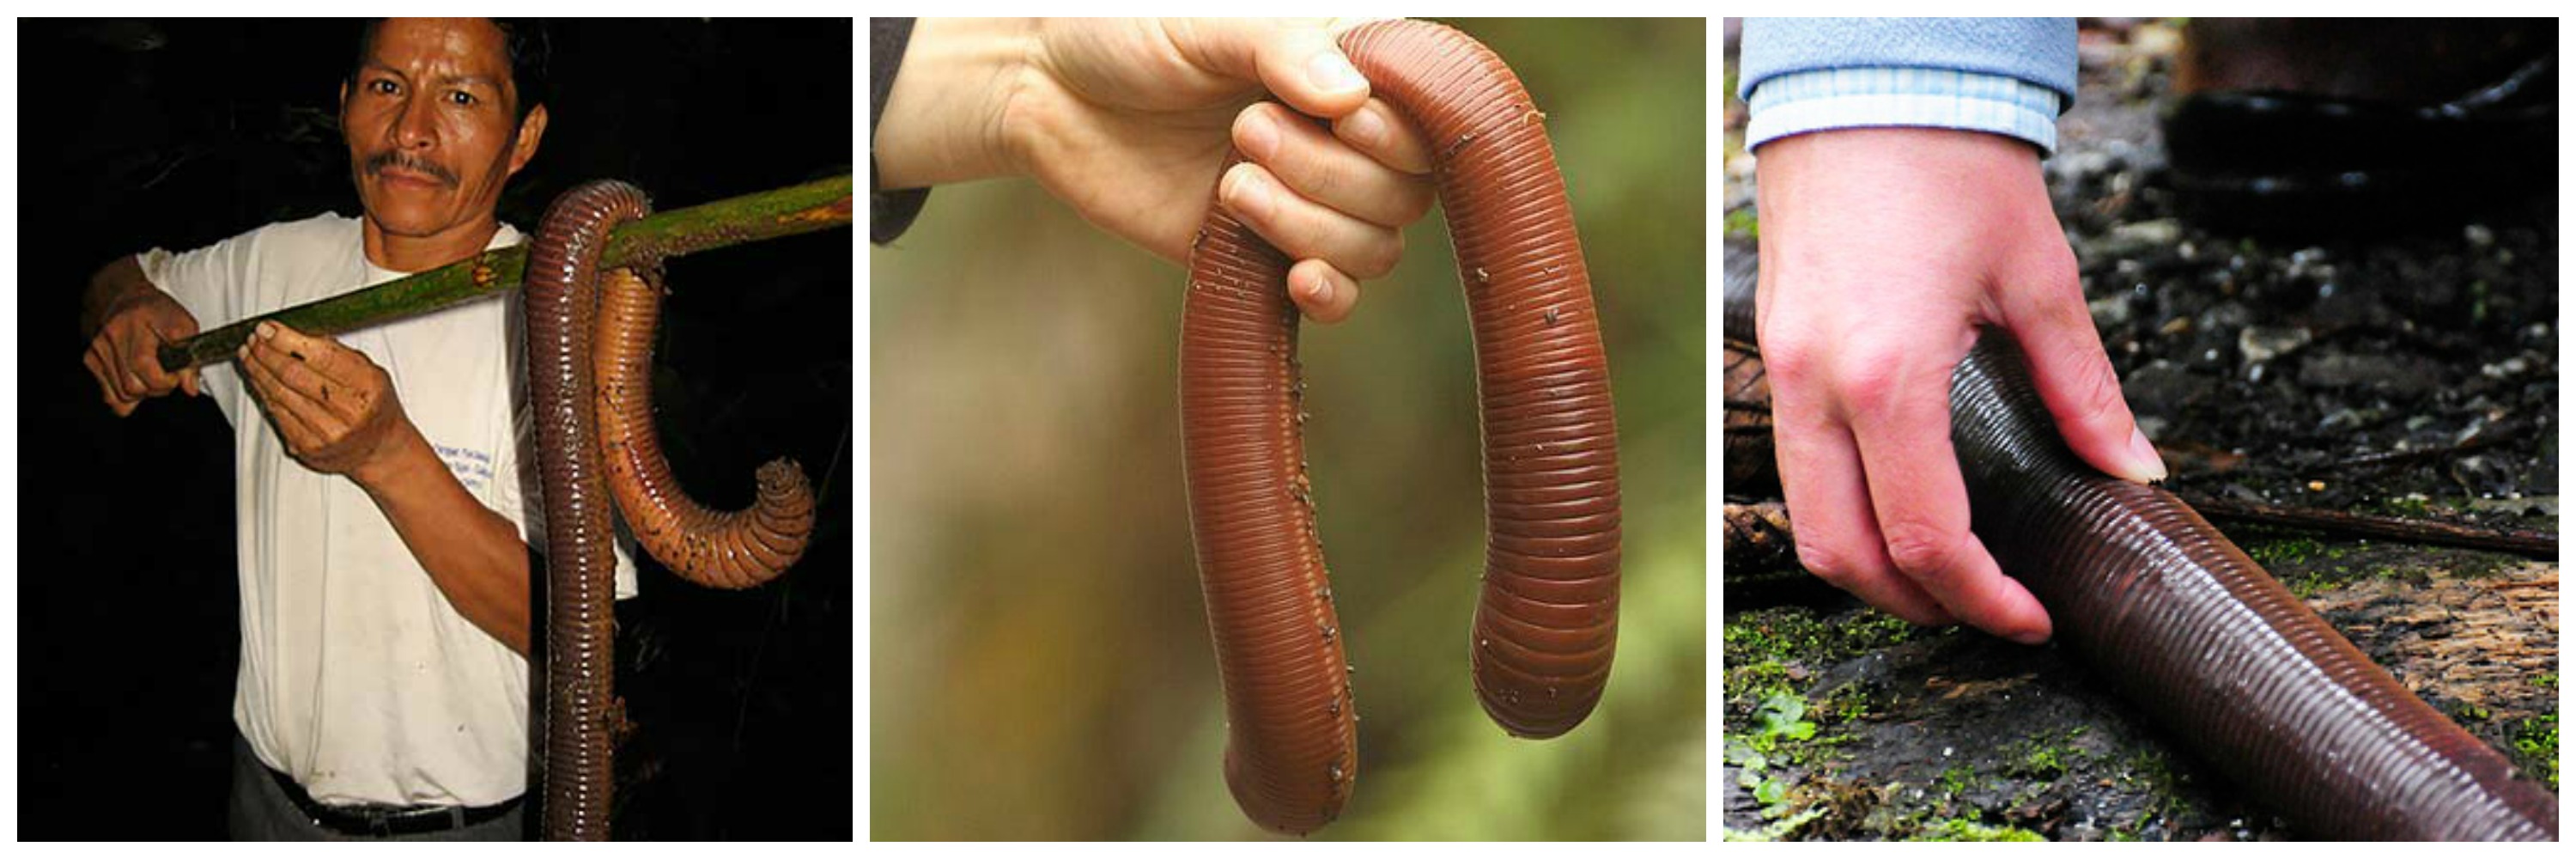 The African Giant Earthworm (Microchaetus rappi) is the largest of